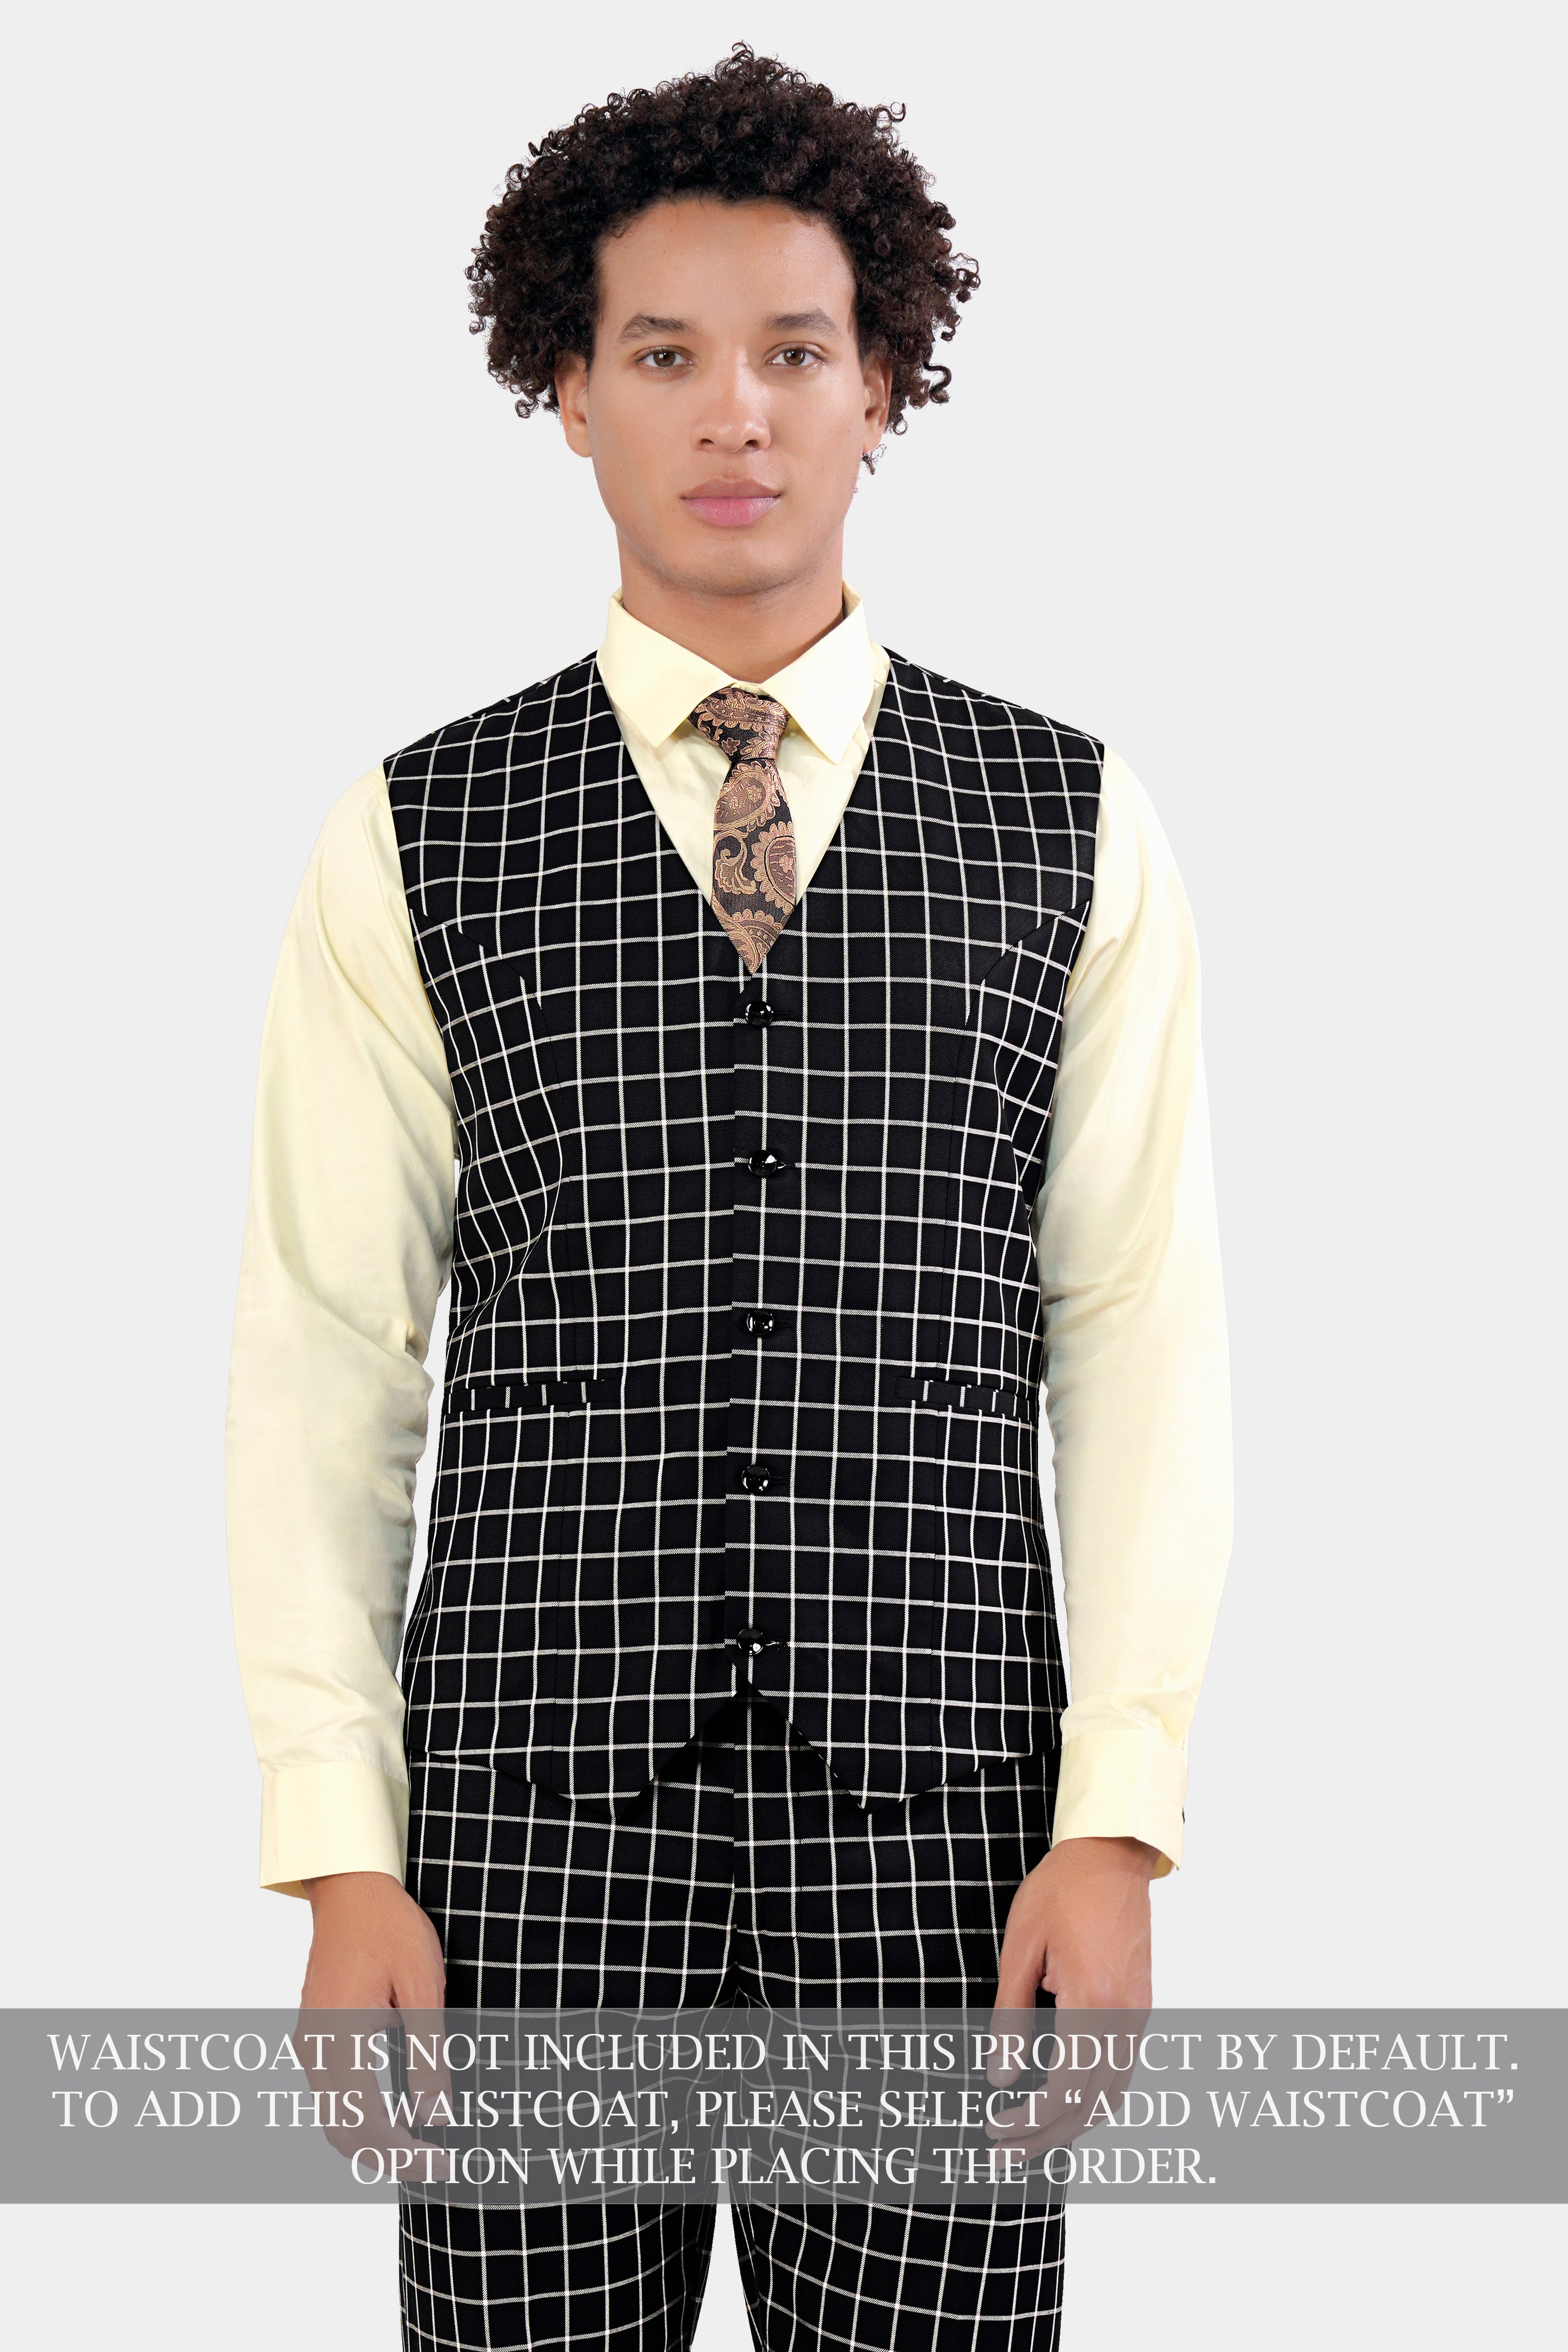 Jade Black and White Checkered Wool Rich Double Breasted Suit ST2932-DB-36,ST2932-DB-38,ST2932-DB-40,ST2932-DB-42,ST2932-DB-44,ST2932-DB-46,ST2932-DB-48,ST2932-DB-50,ST2932-DB-52,ST2932-DB-54,ST2932-DB-56,ST2932-DB-58,ST2932-DB-60